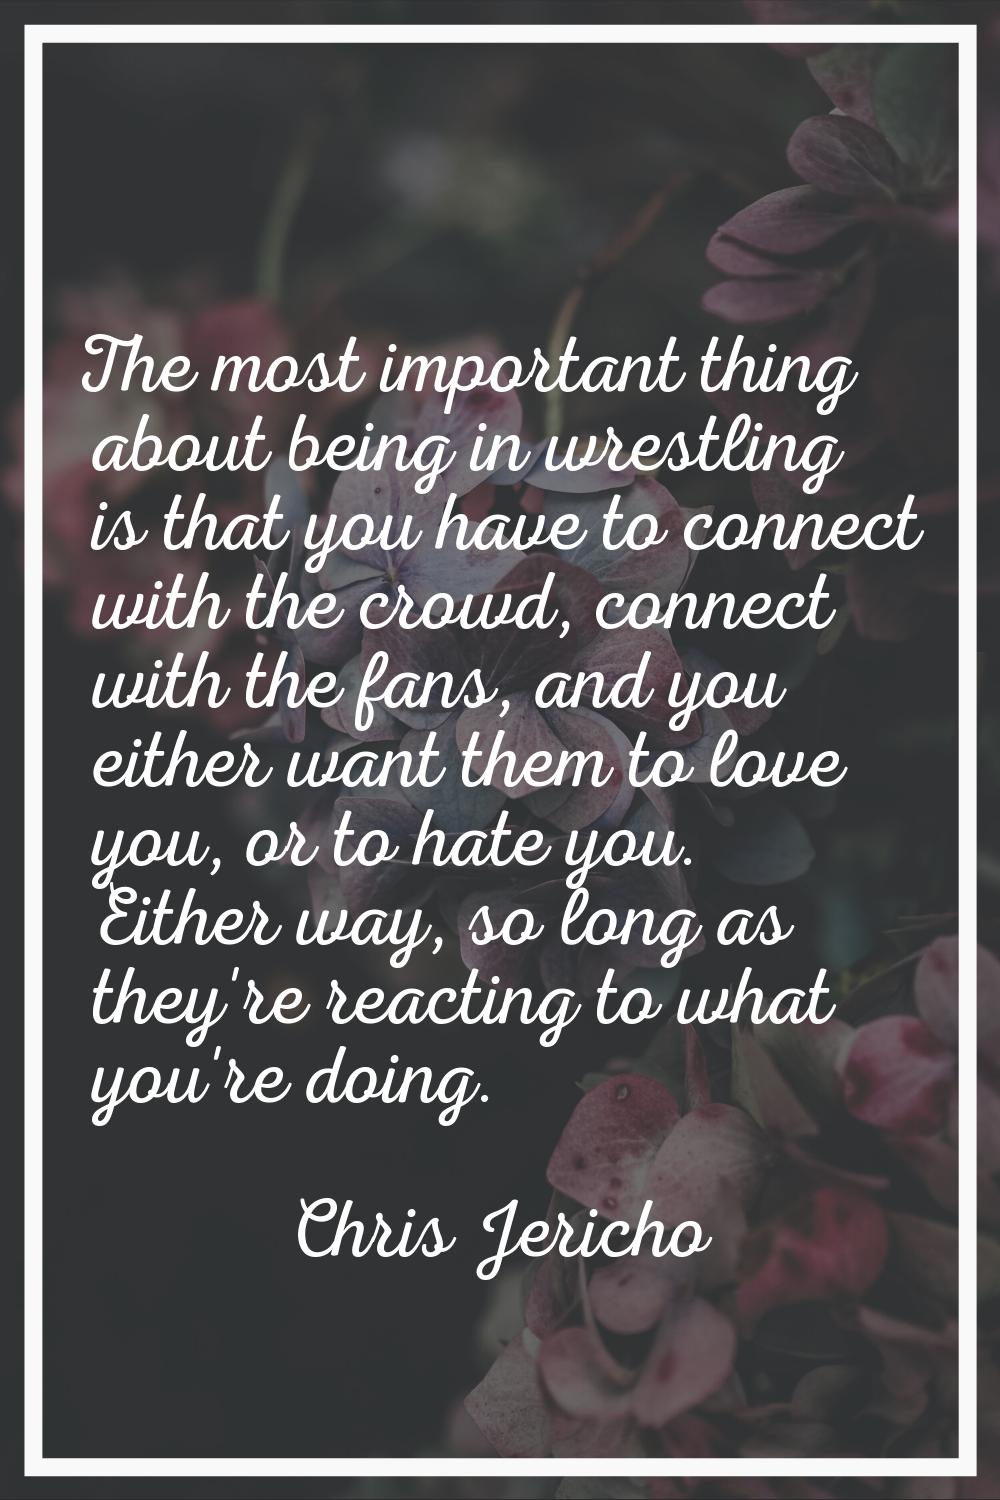 The most important thing about being in wrestling is that you have to connect with the crowd, conne